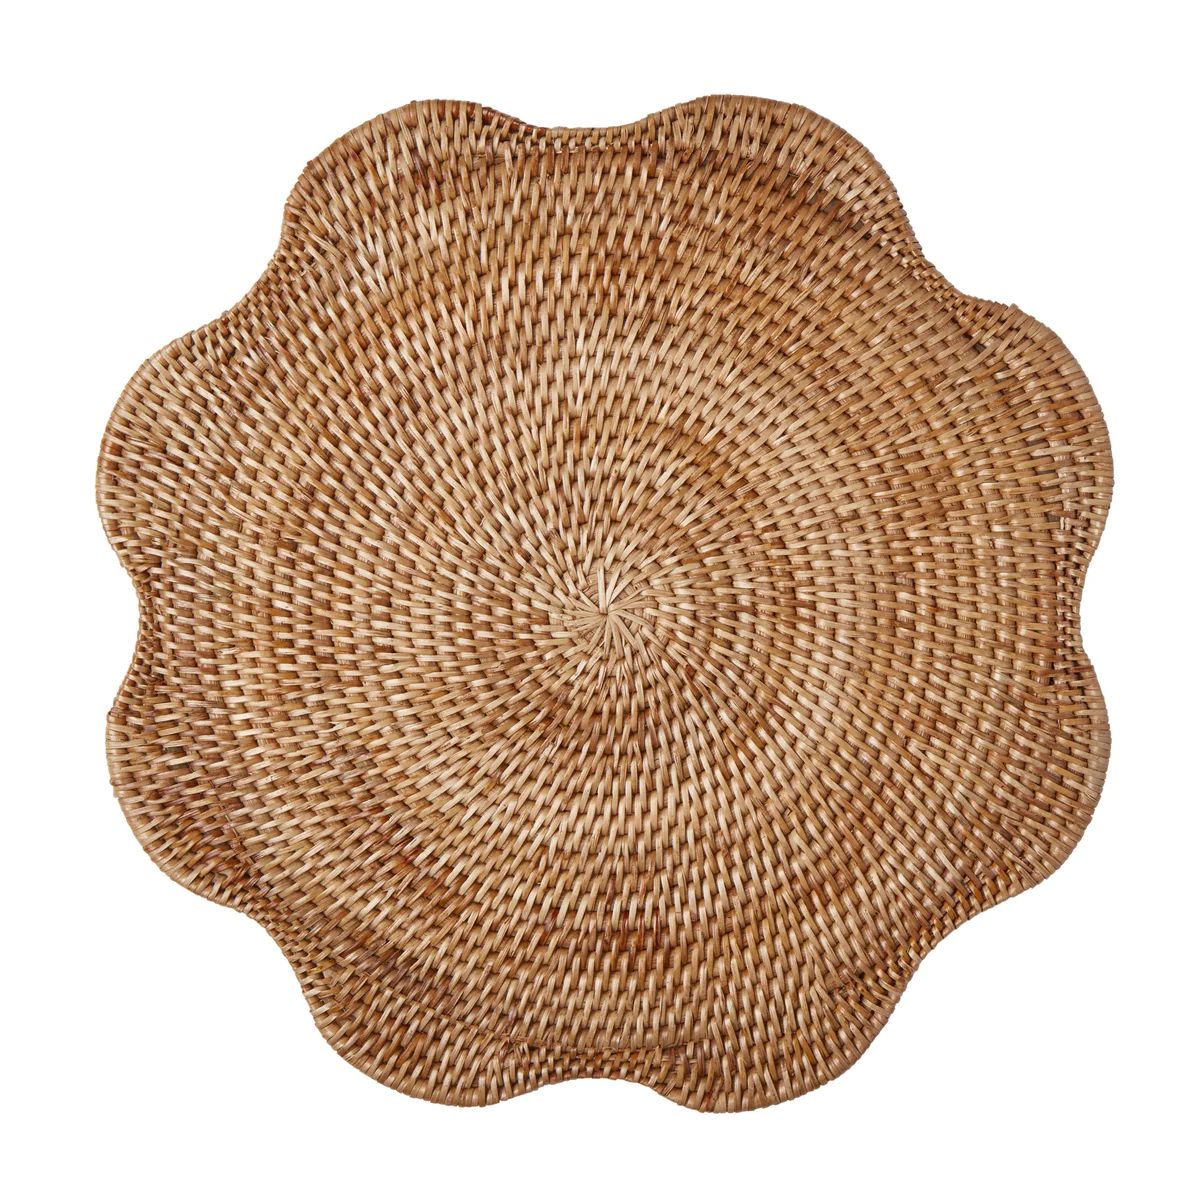 Scalloped Rattan Placemat in Natural | Over The Moon Gift